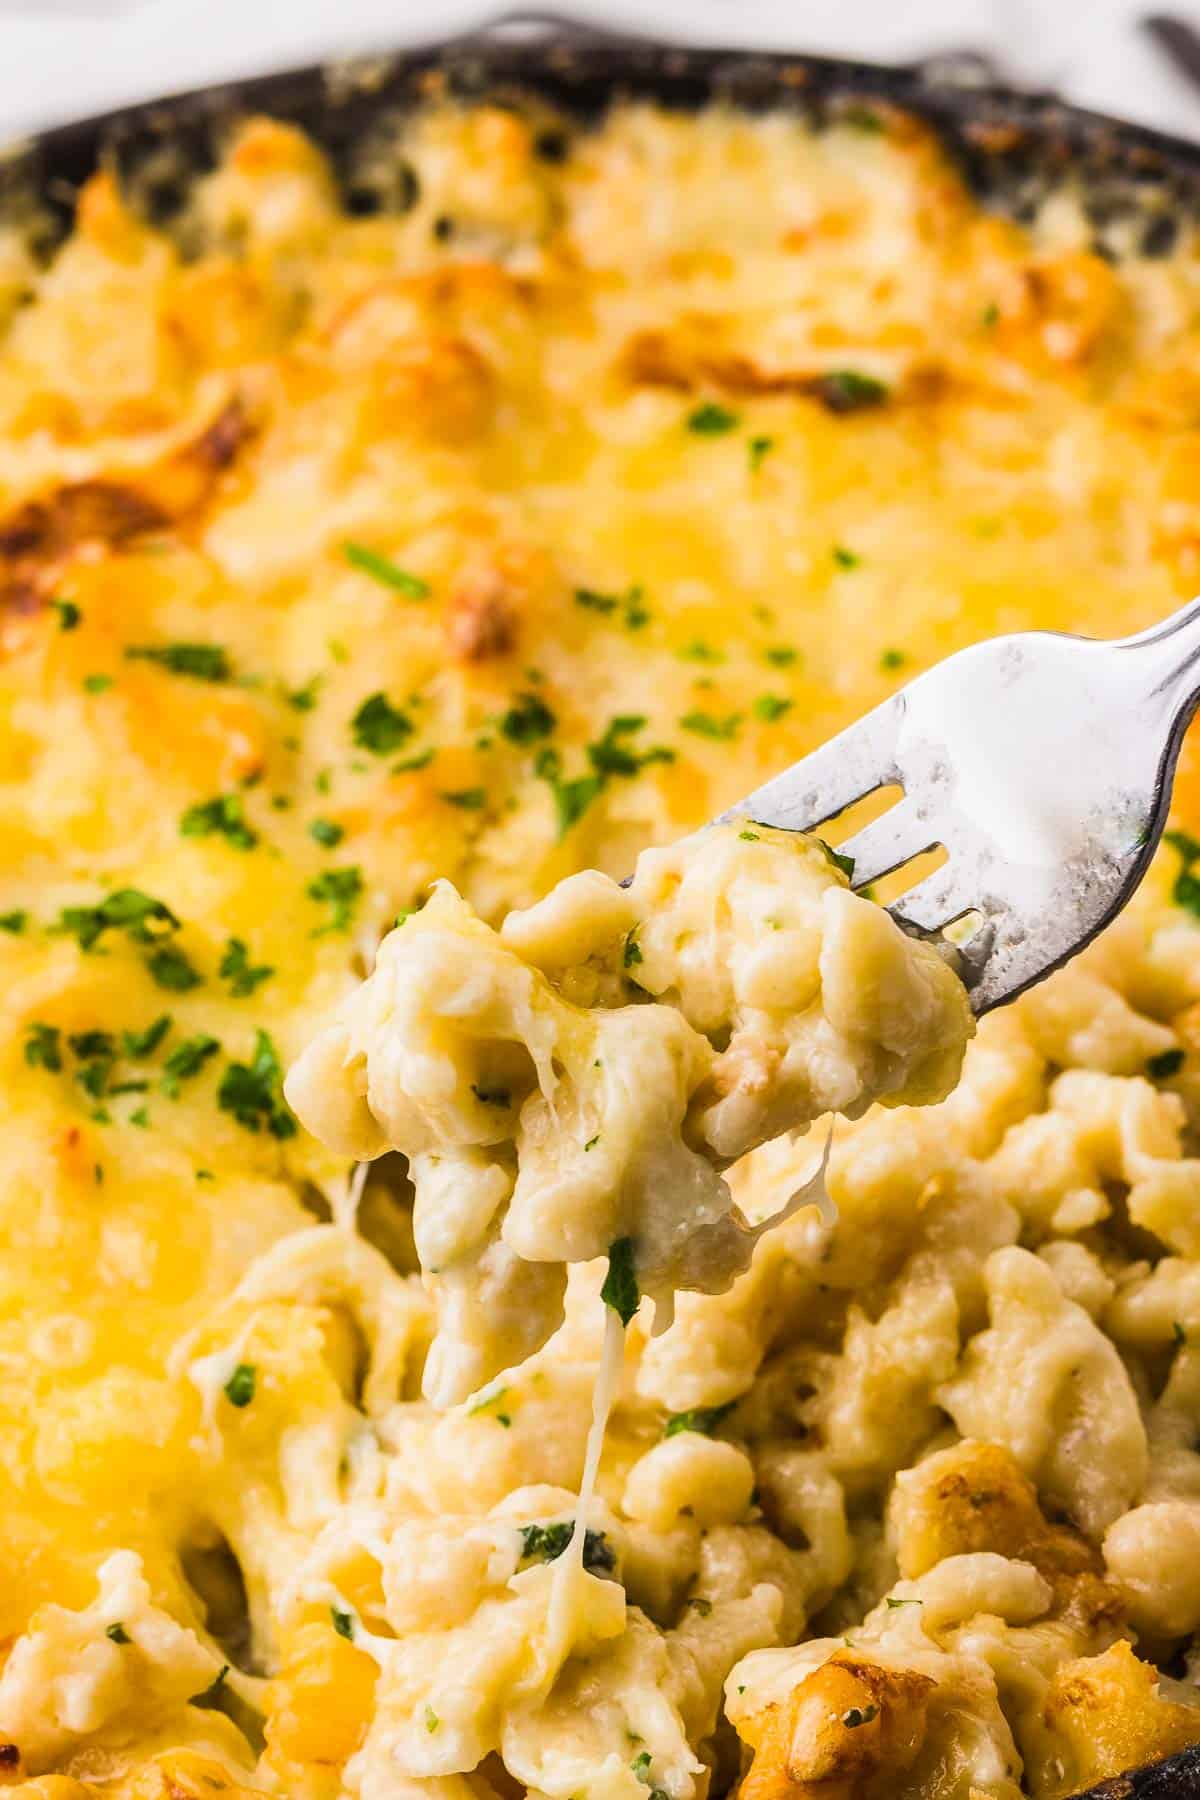 A forkful of Cheese Spaetzle fresh from the oven.